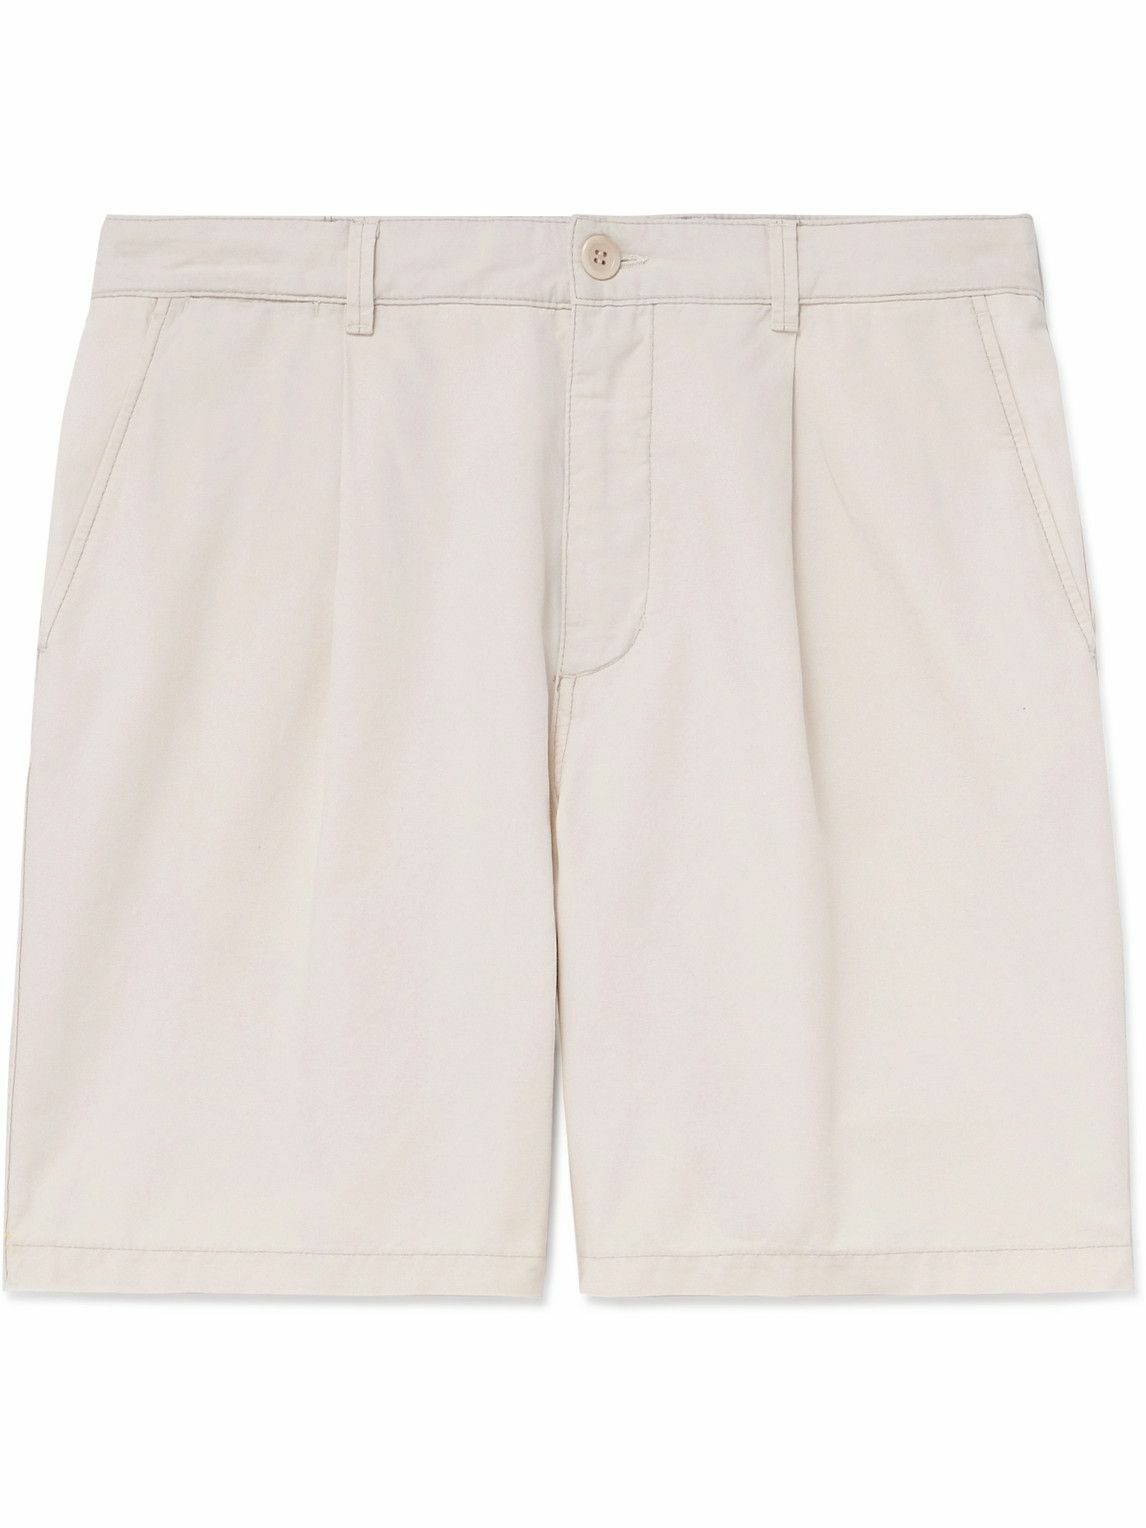 Norse Projects - Straight-Leg Christopher Pleated Cotton Shorts - White ...